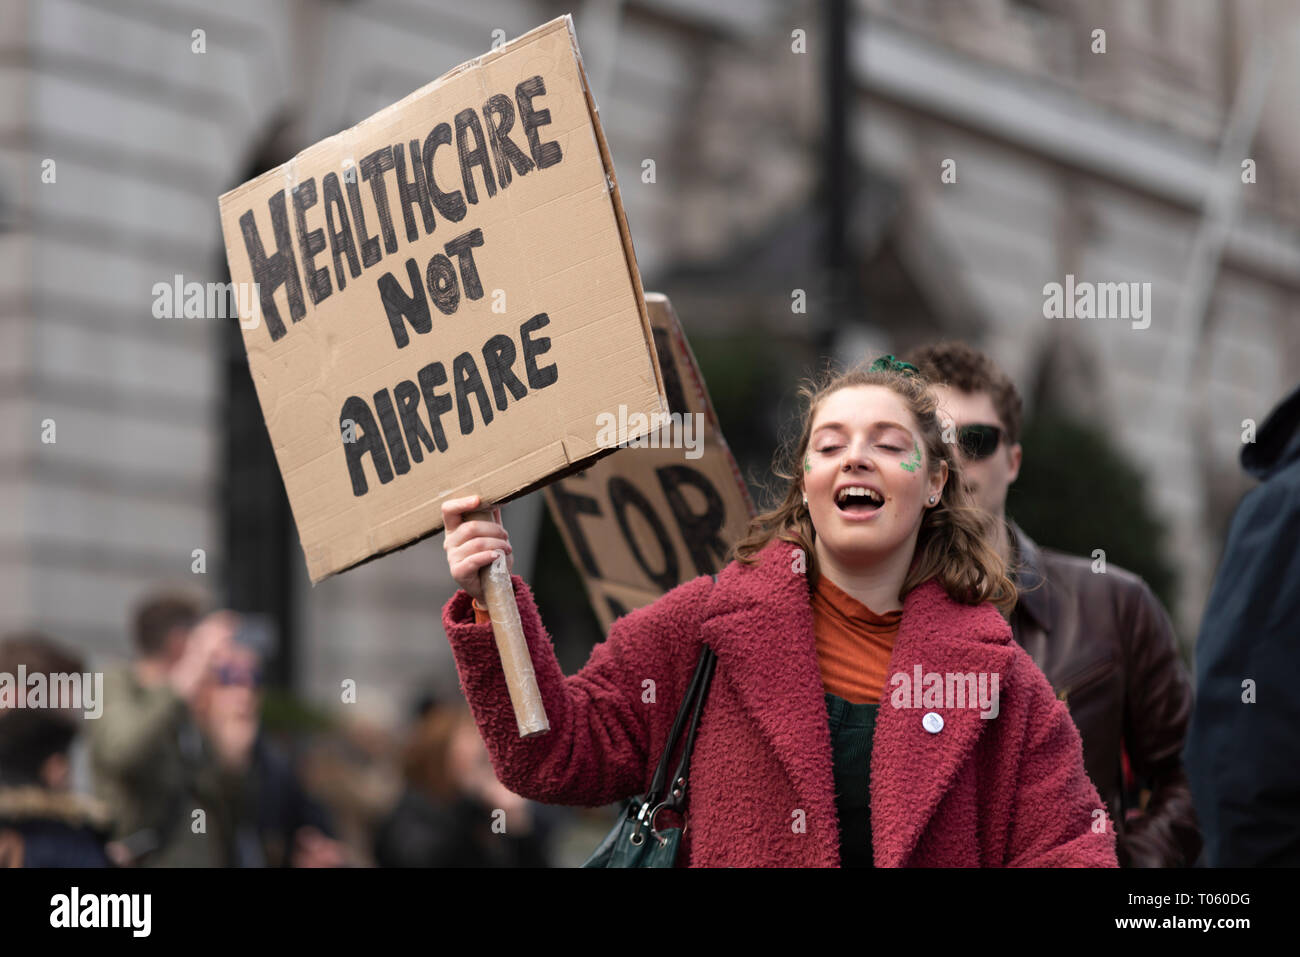 Traditional St Patrick's Day Parade through London, UK. London Irish Abortion rights campaign female with placard Healthcare not airfare Stock Photo